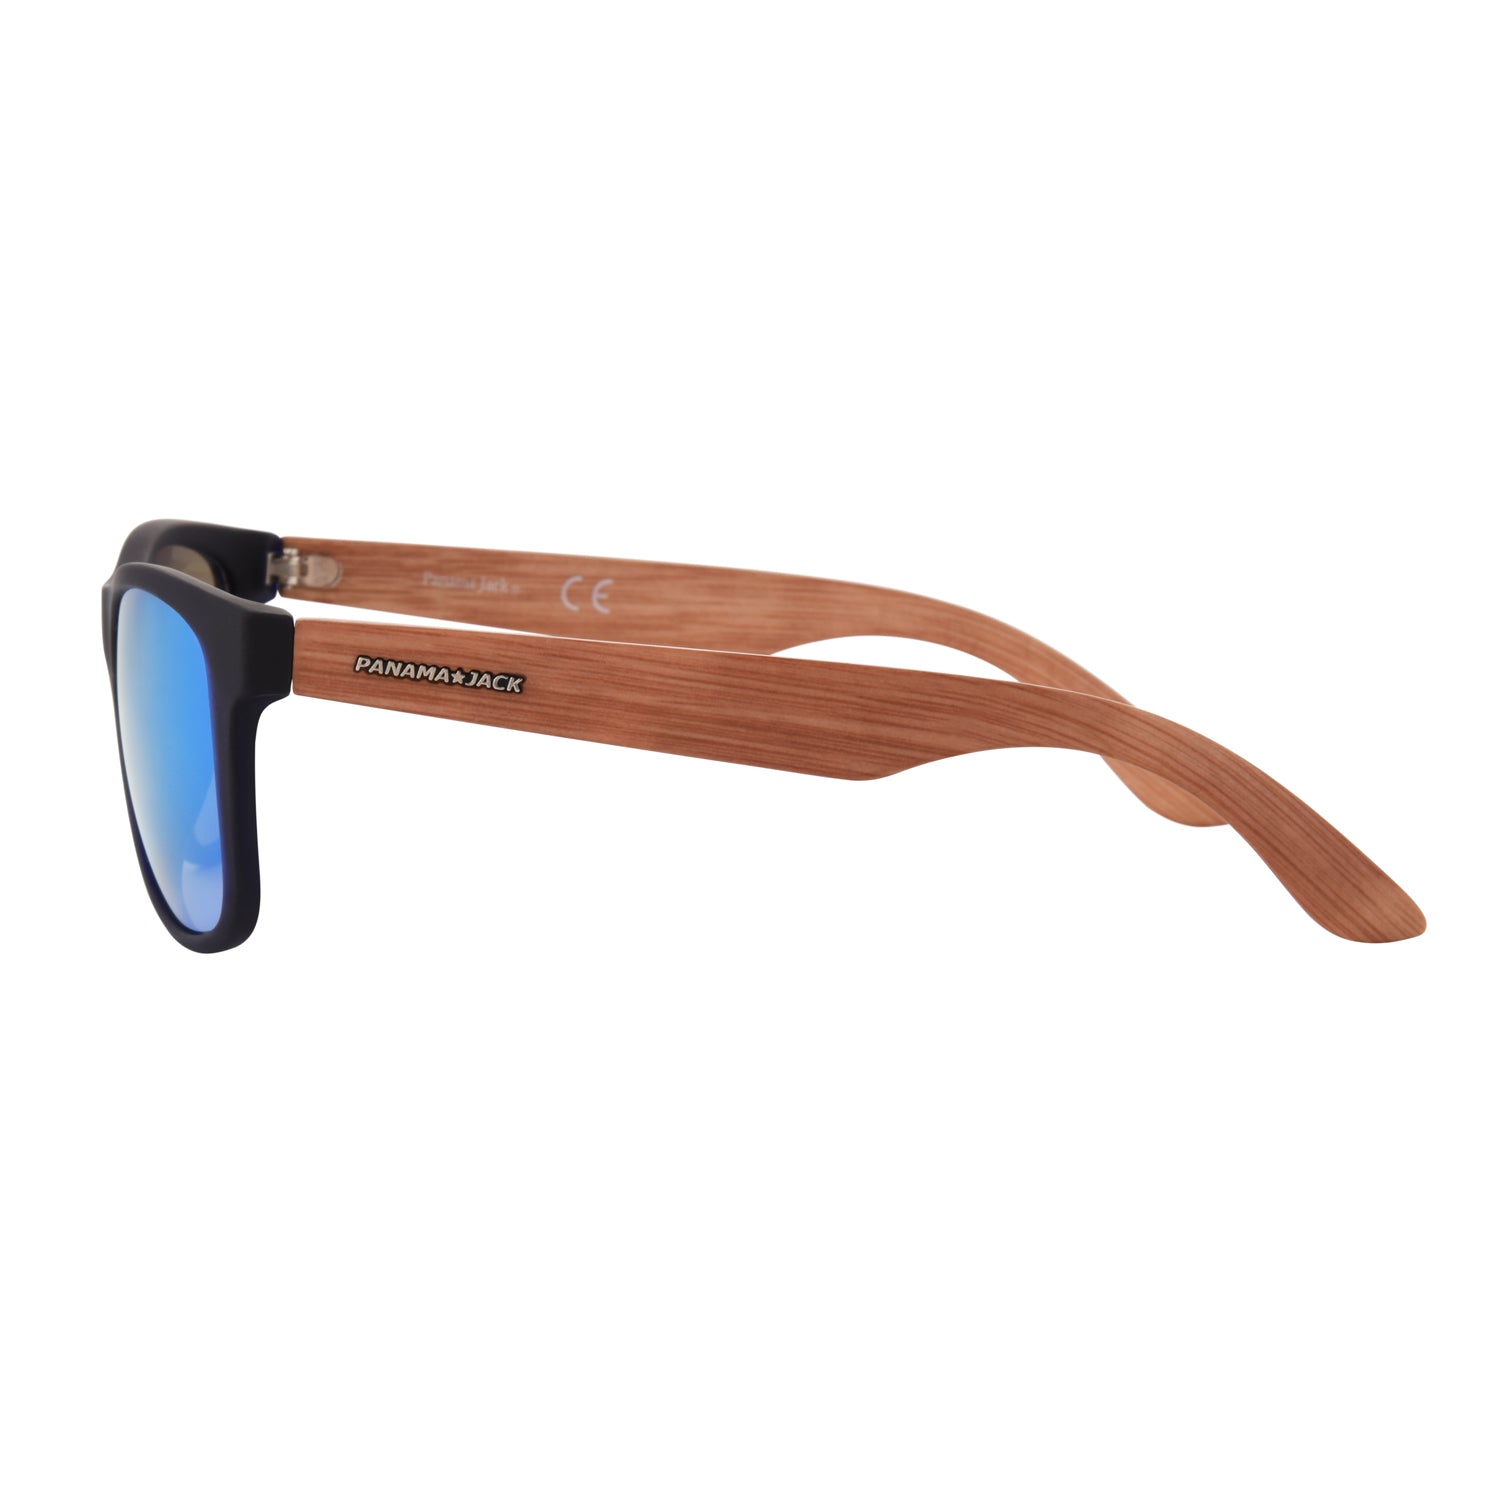 Blue Rubberized Wood Print Sunglasses with Mirror Lens